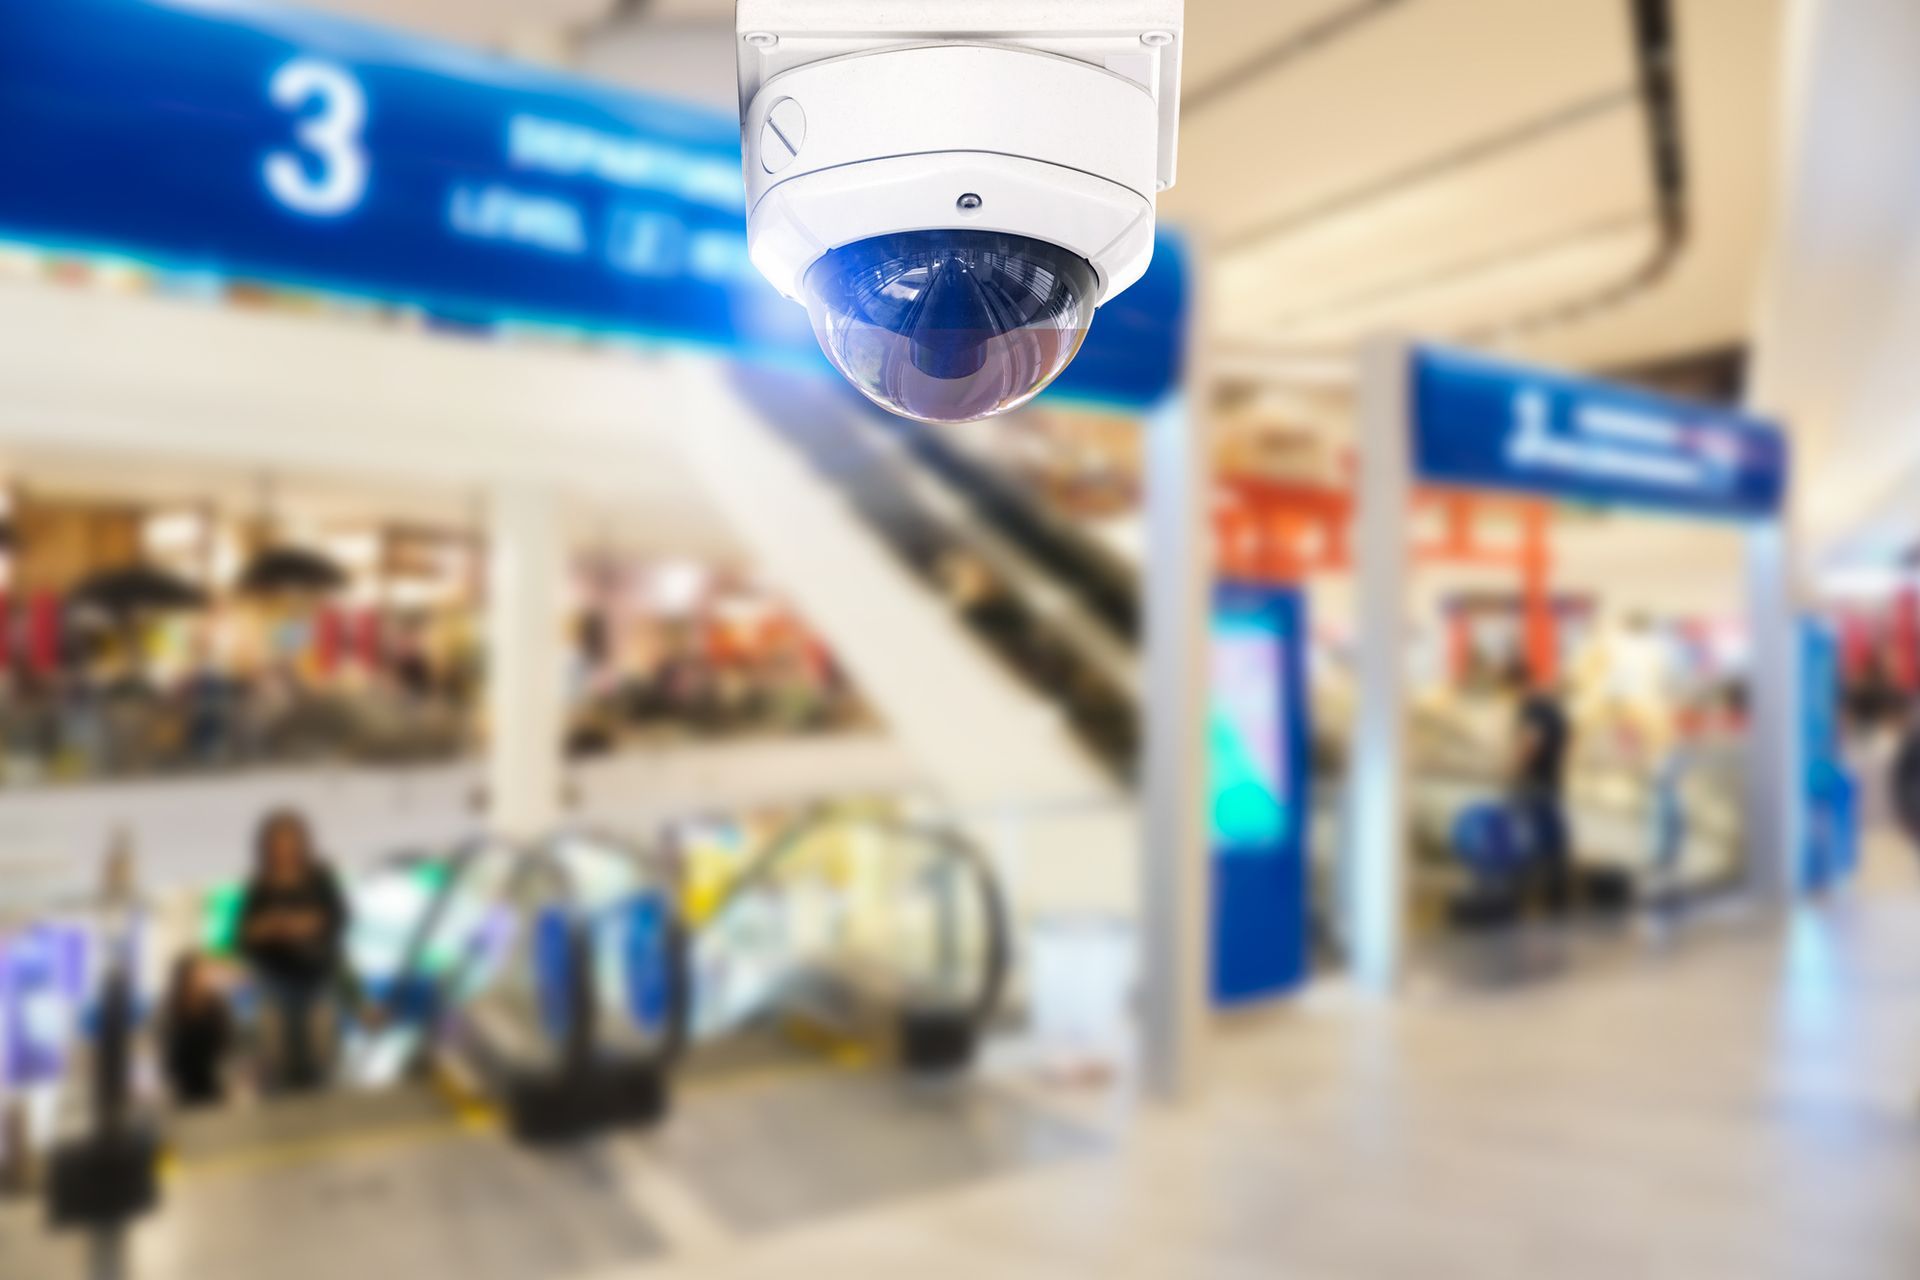 A security camera in a shopping mall shows Surveillance Systems for Retail Safety in Maryland.